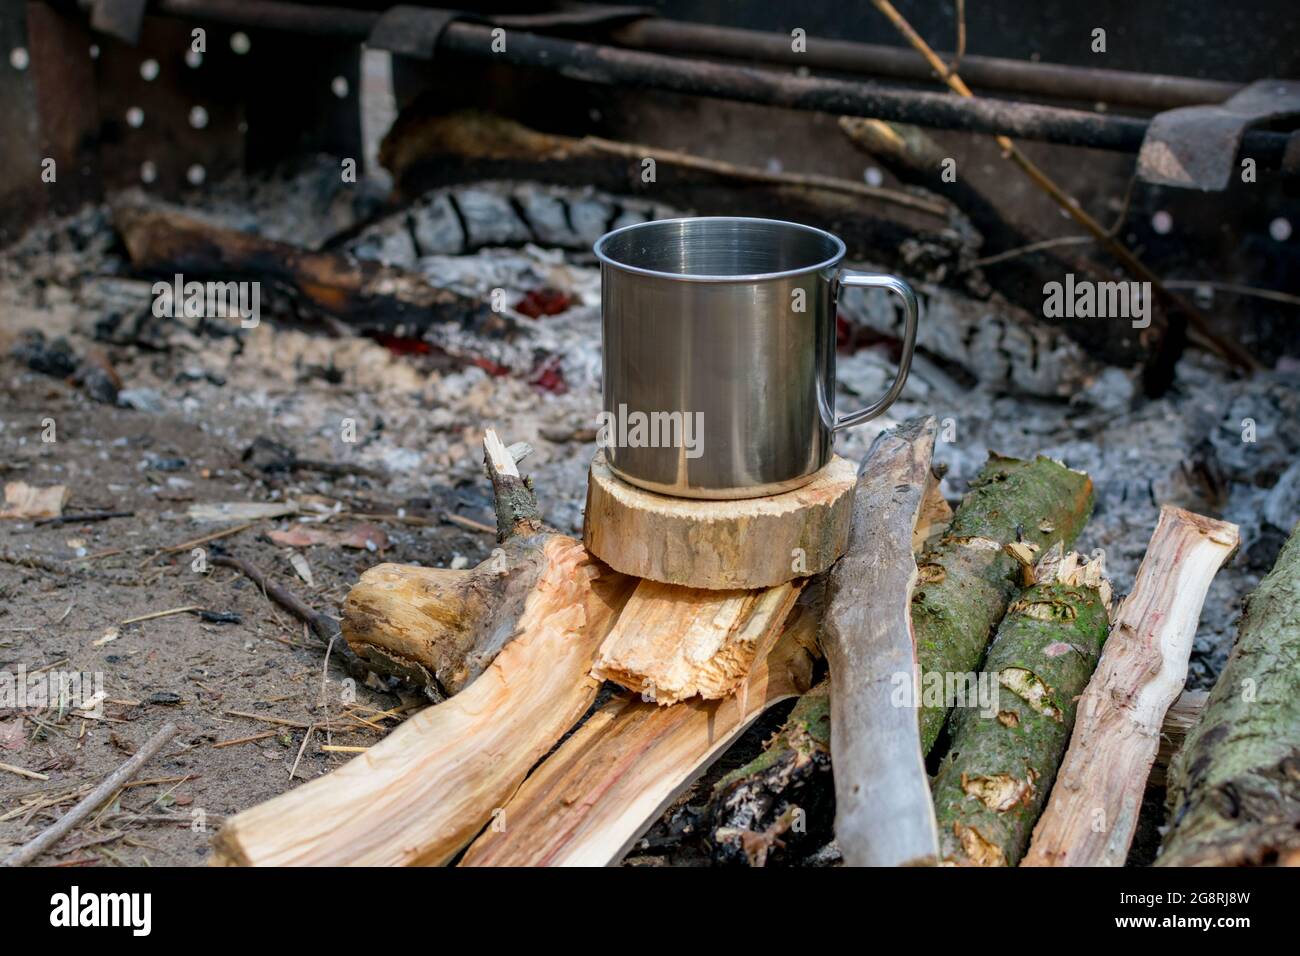 https://c8.alamy.com/comp/2G8RJ8W/a-mug-of-hot-tea-or-coffee-is-on-the-wood-by-the-fire-empty-space-for-text-tourism-concept-2G8RJ8W.jpg